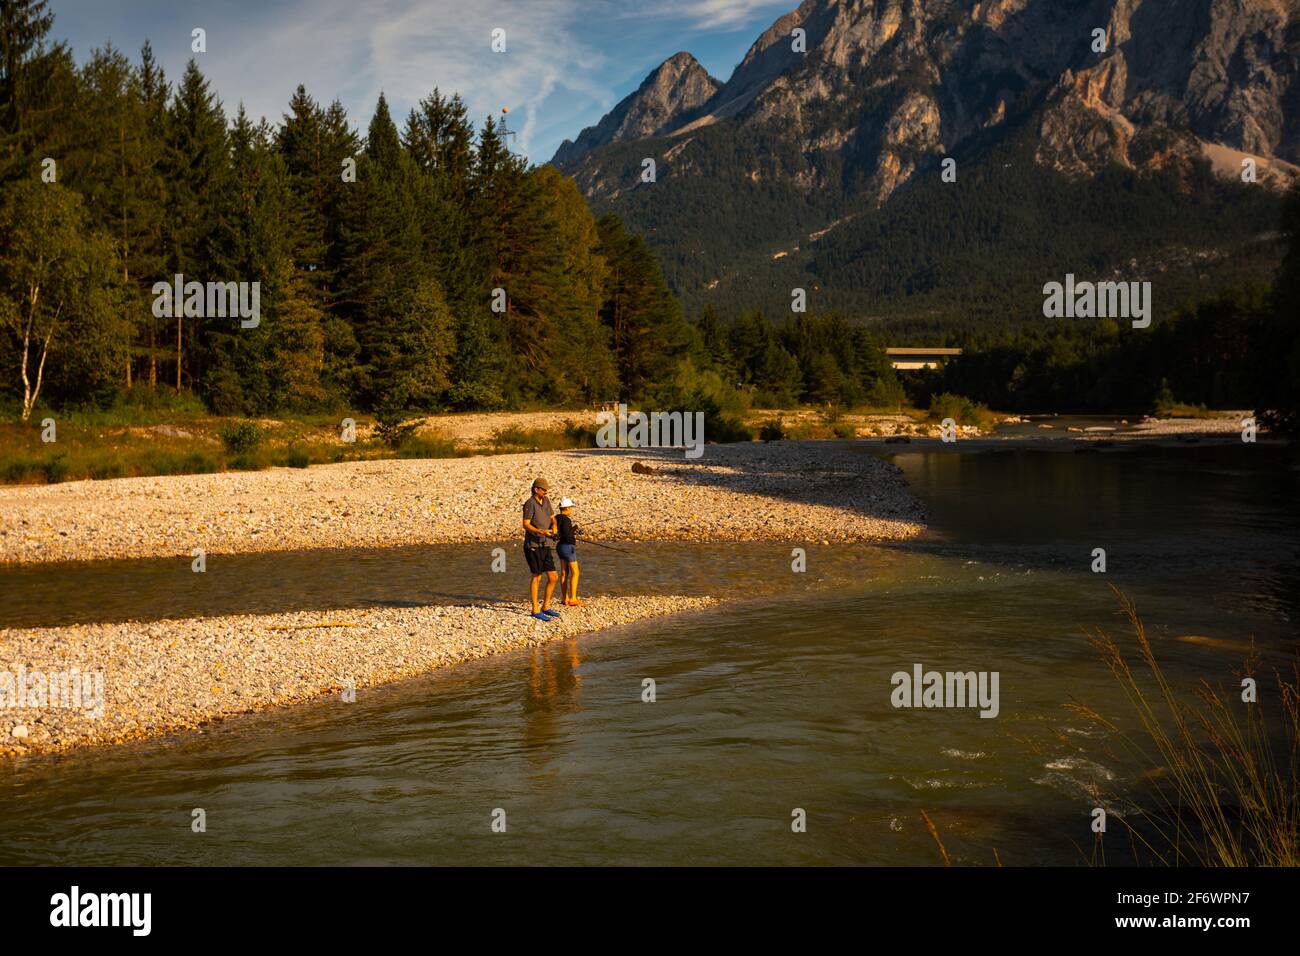 Father and son fishing on Gaililz river at sunset, Austria Stock Photo